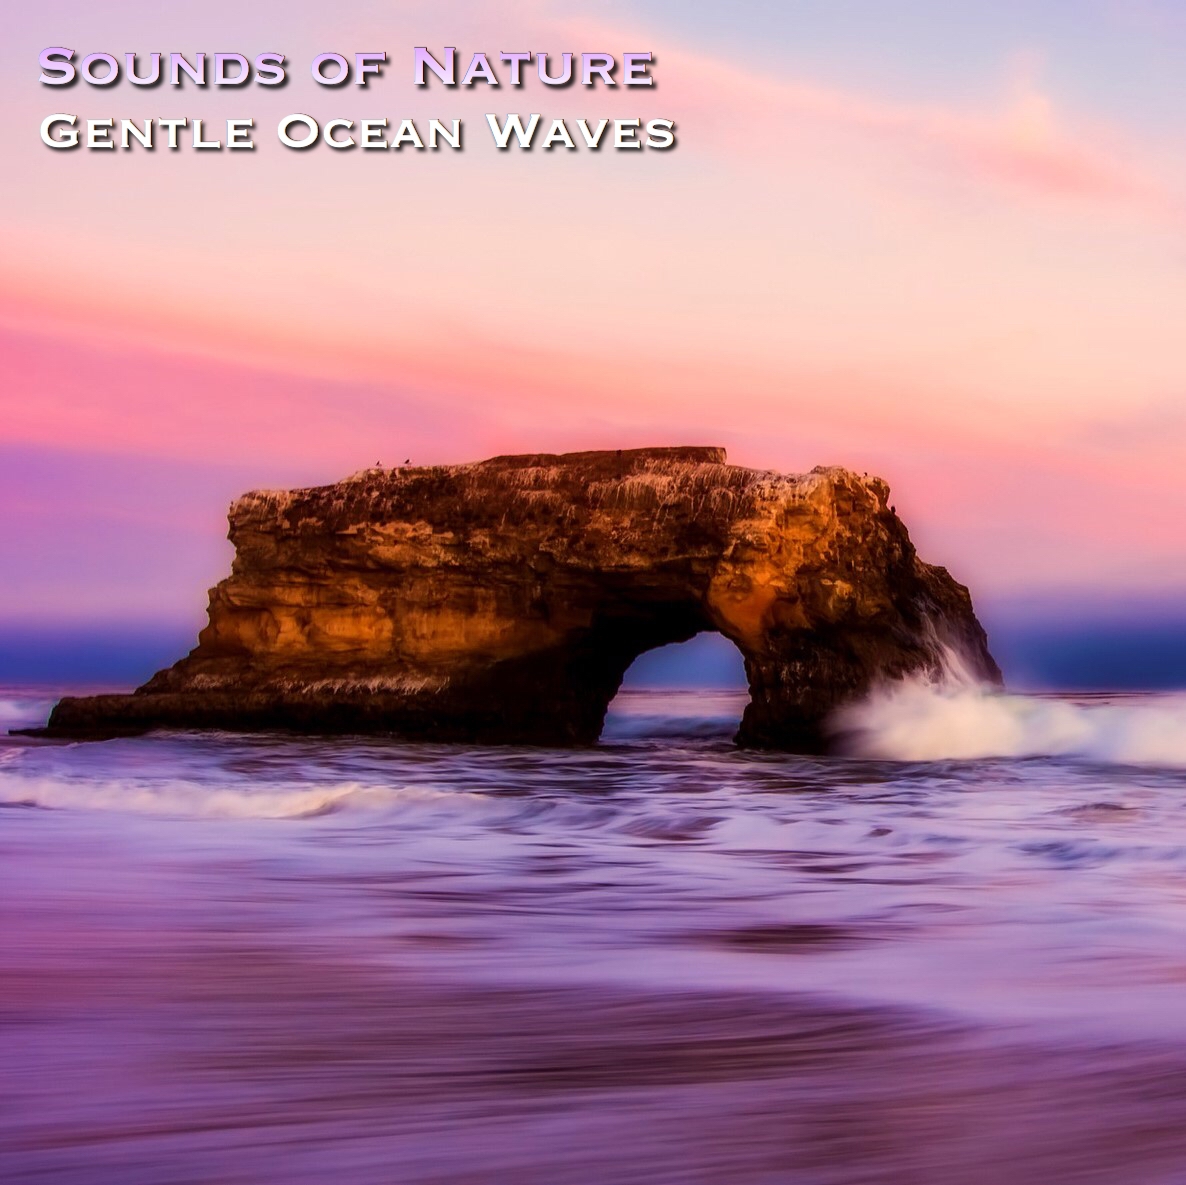 Free ocean waves mp3 sounds